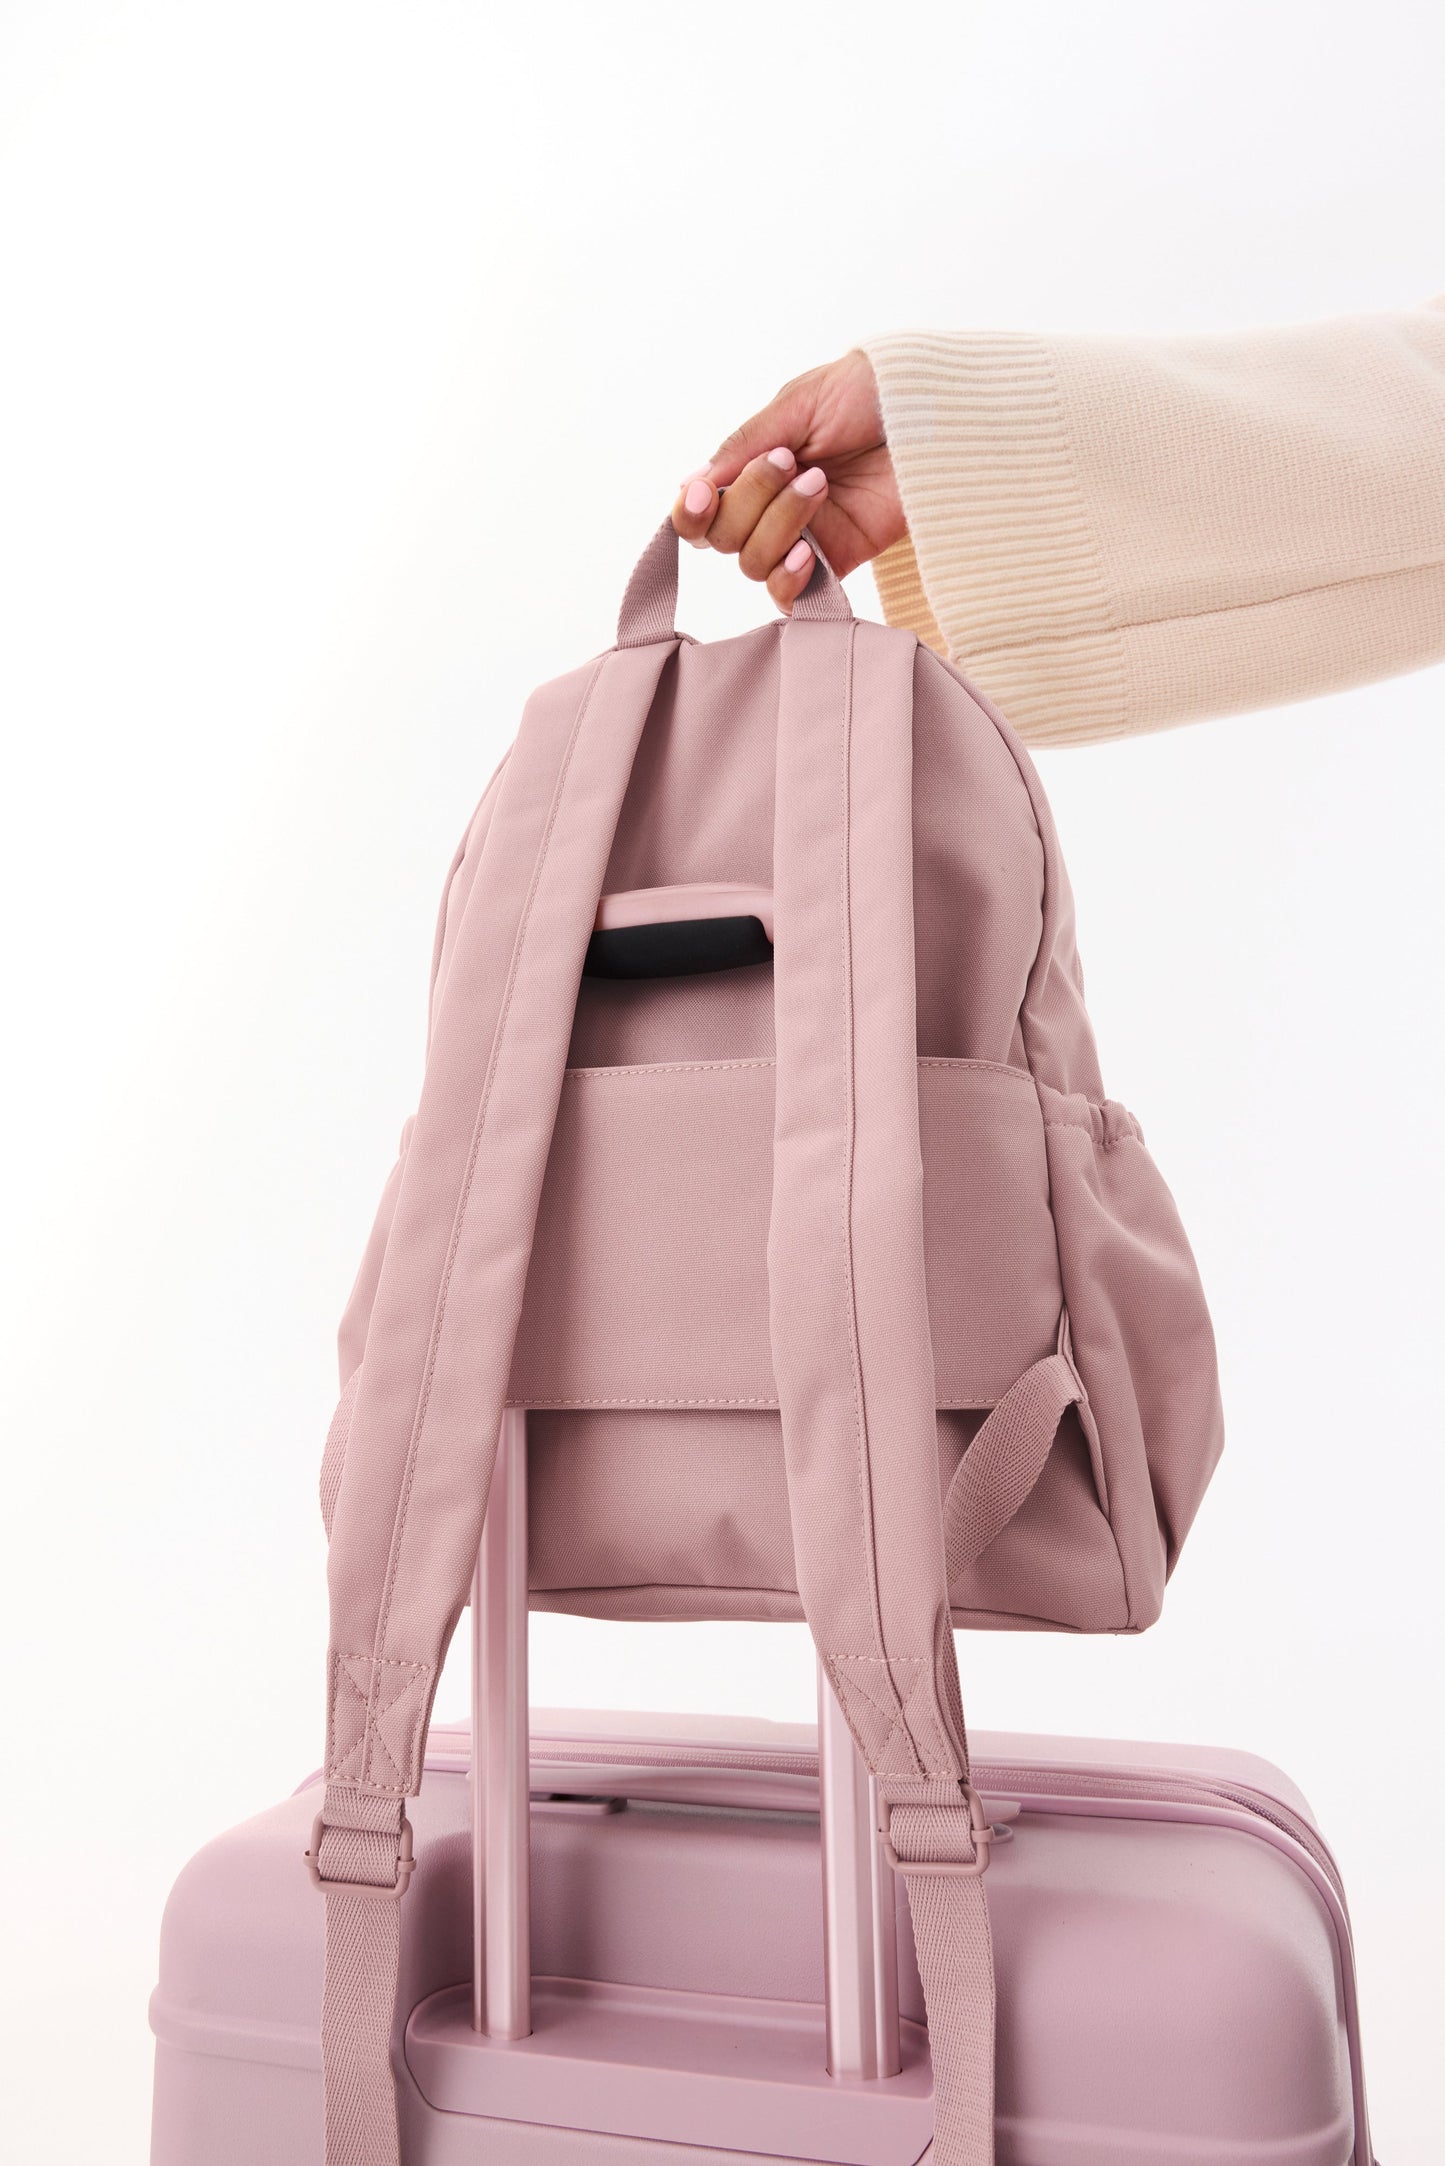 The BÉISics Backpack in Atlas Pink